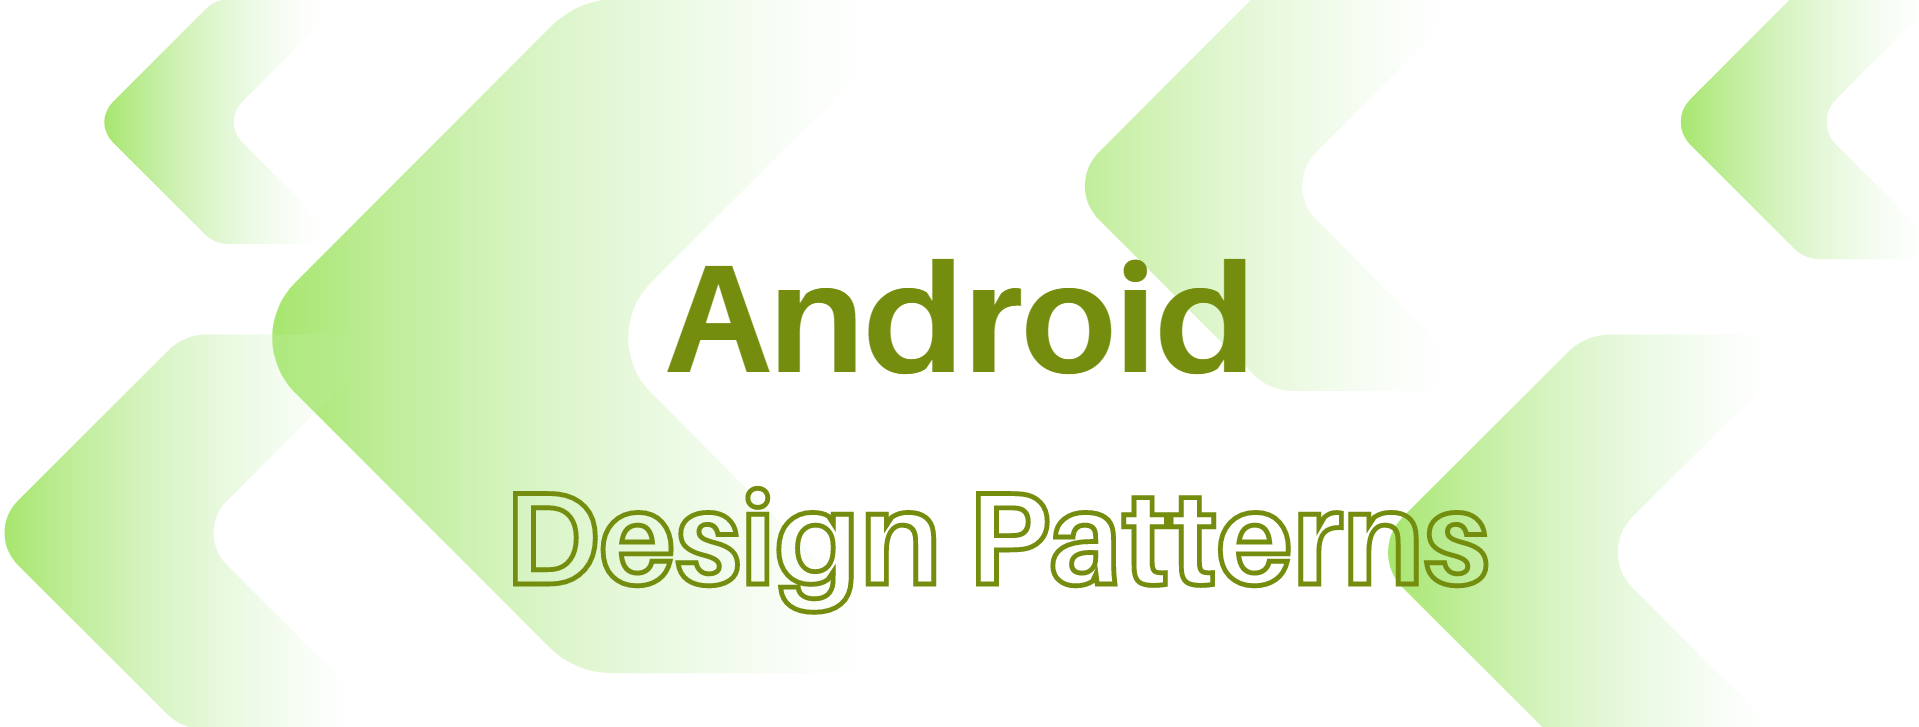 Android Design patterns